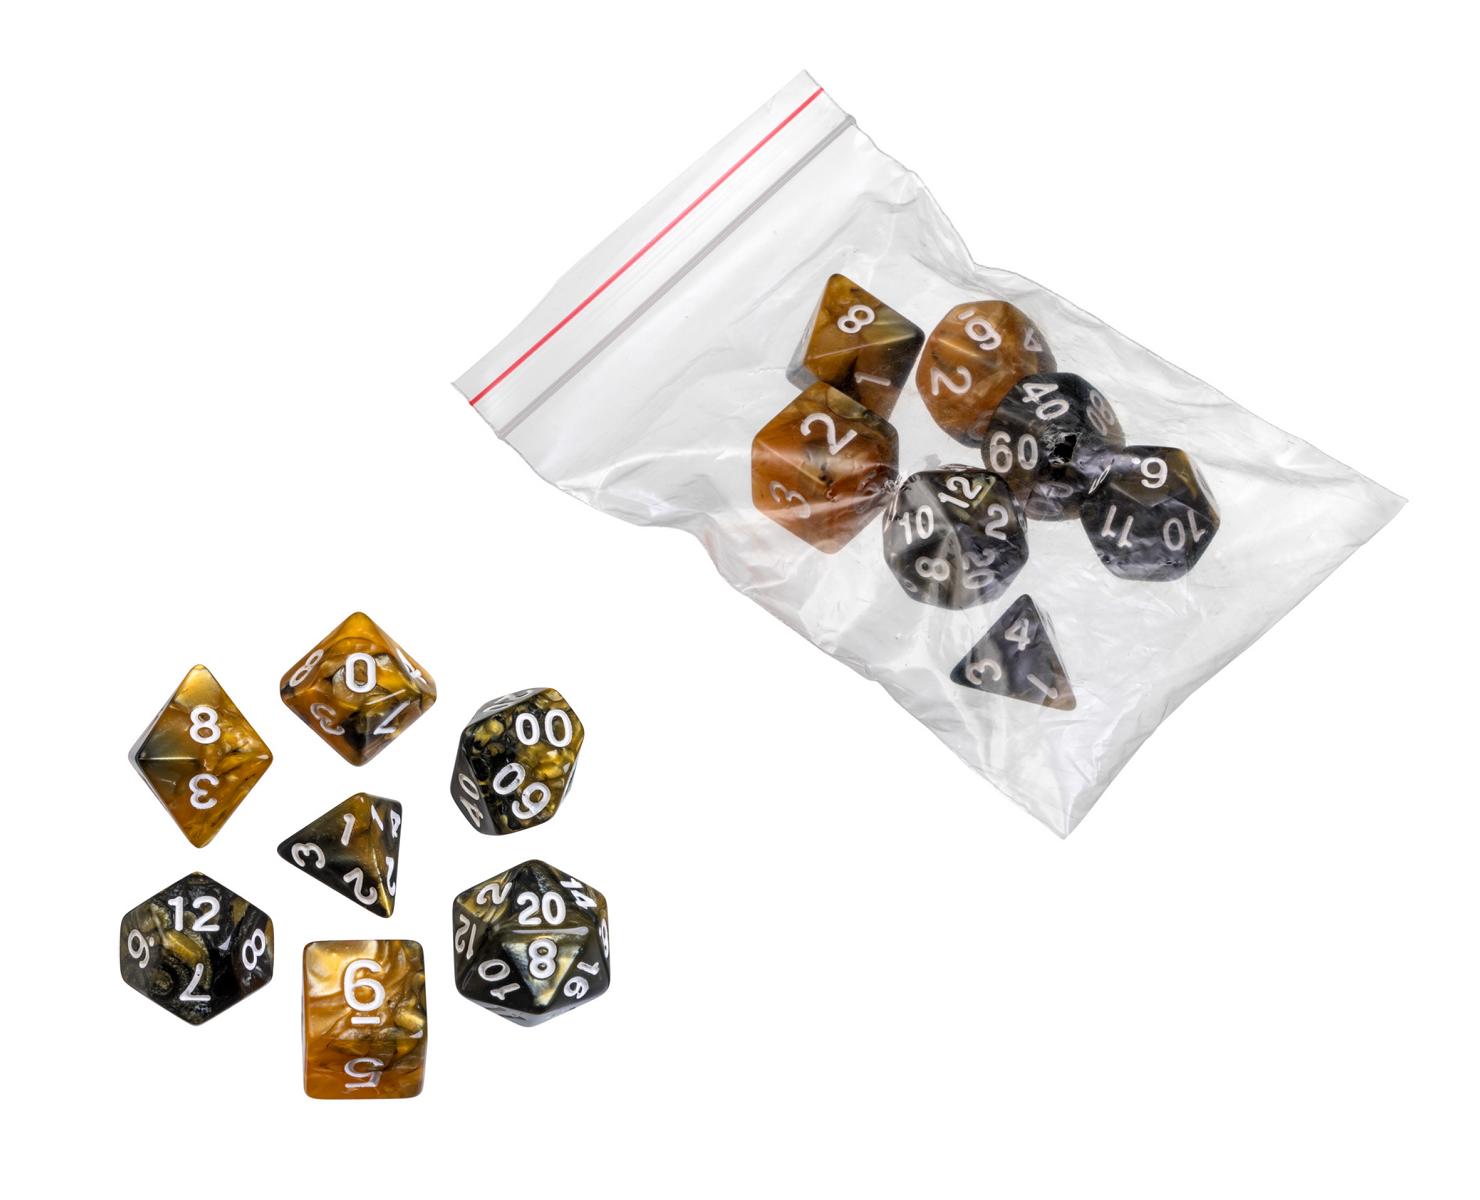 Dice, oblivion, yellow, 7 pieces in polybag